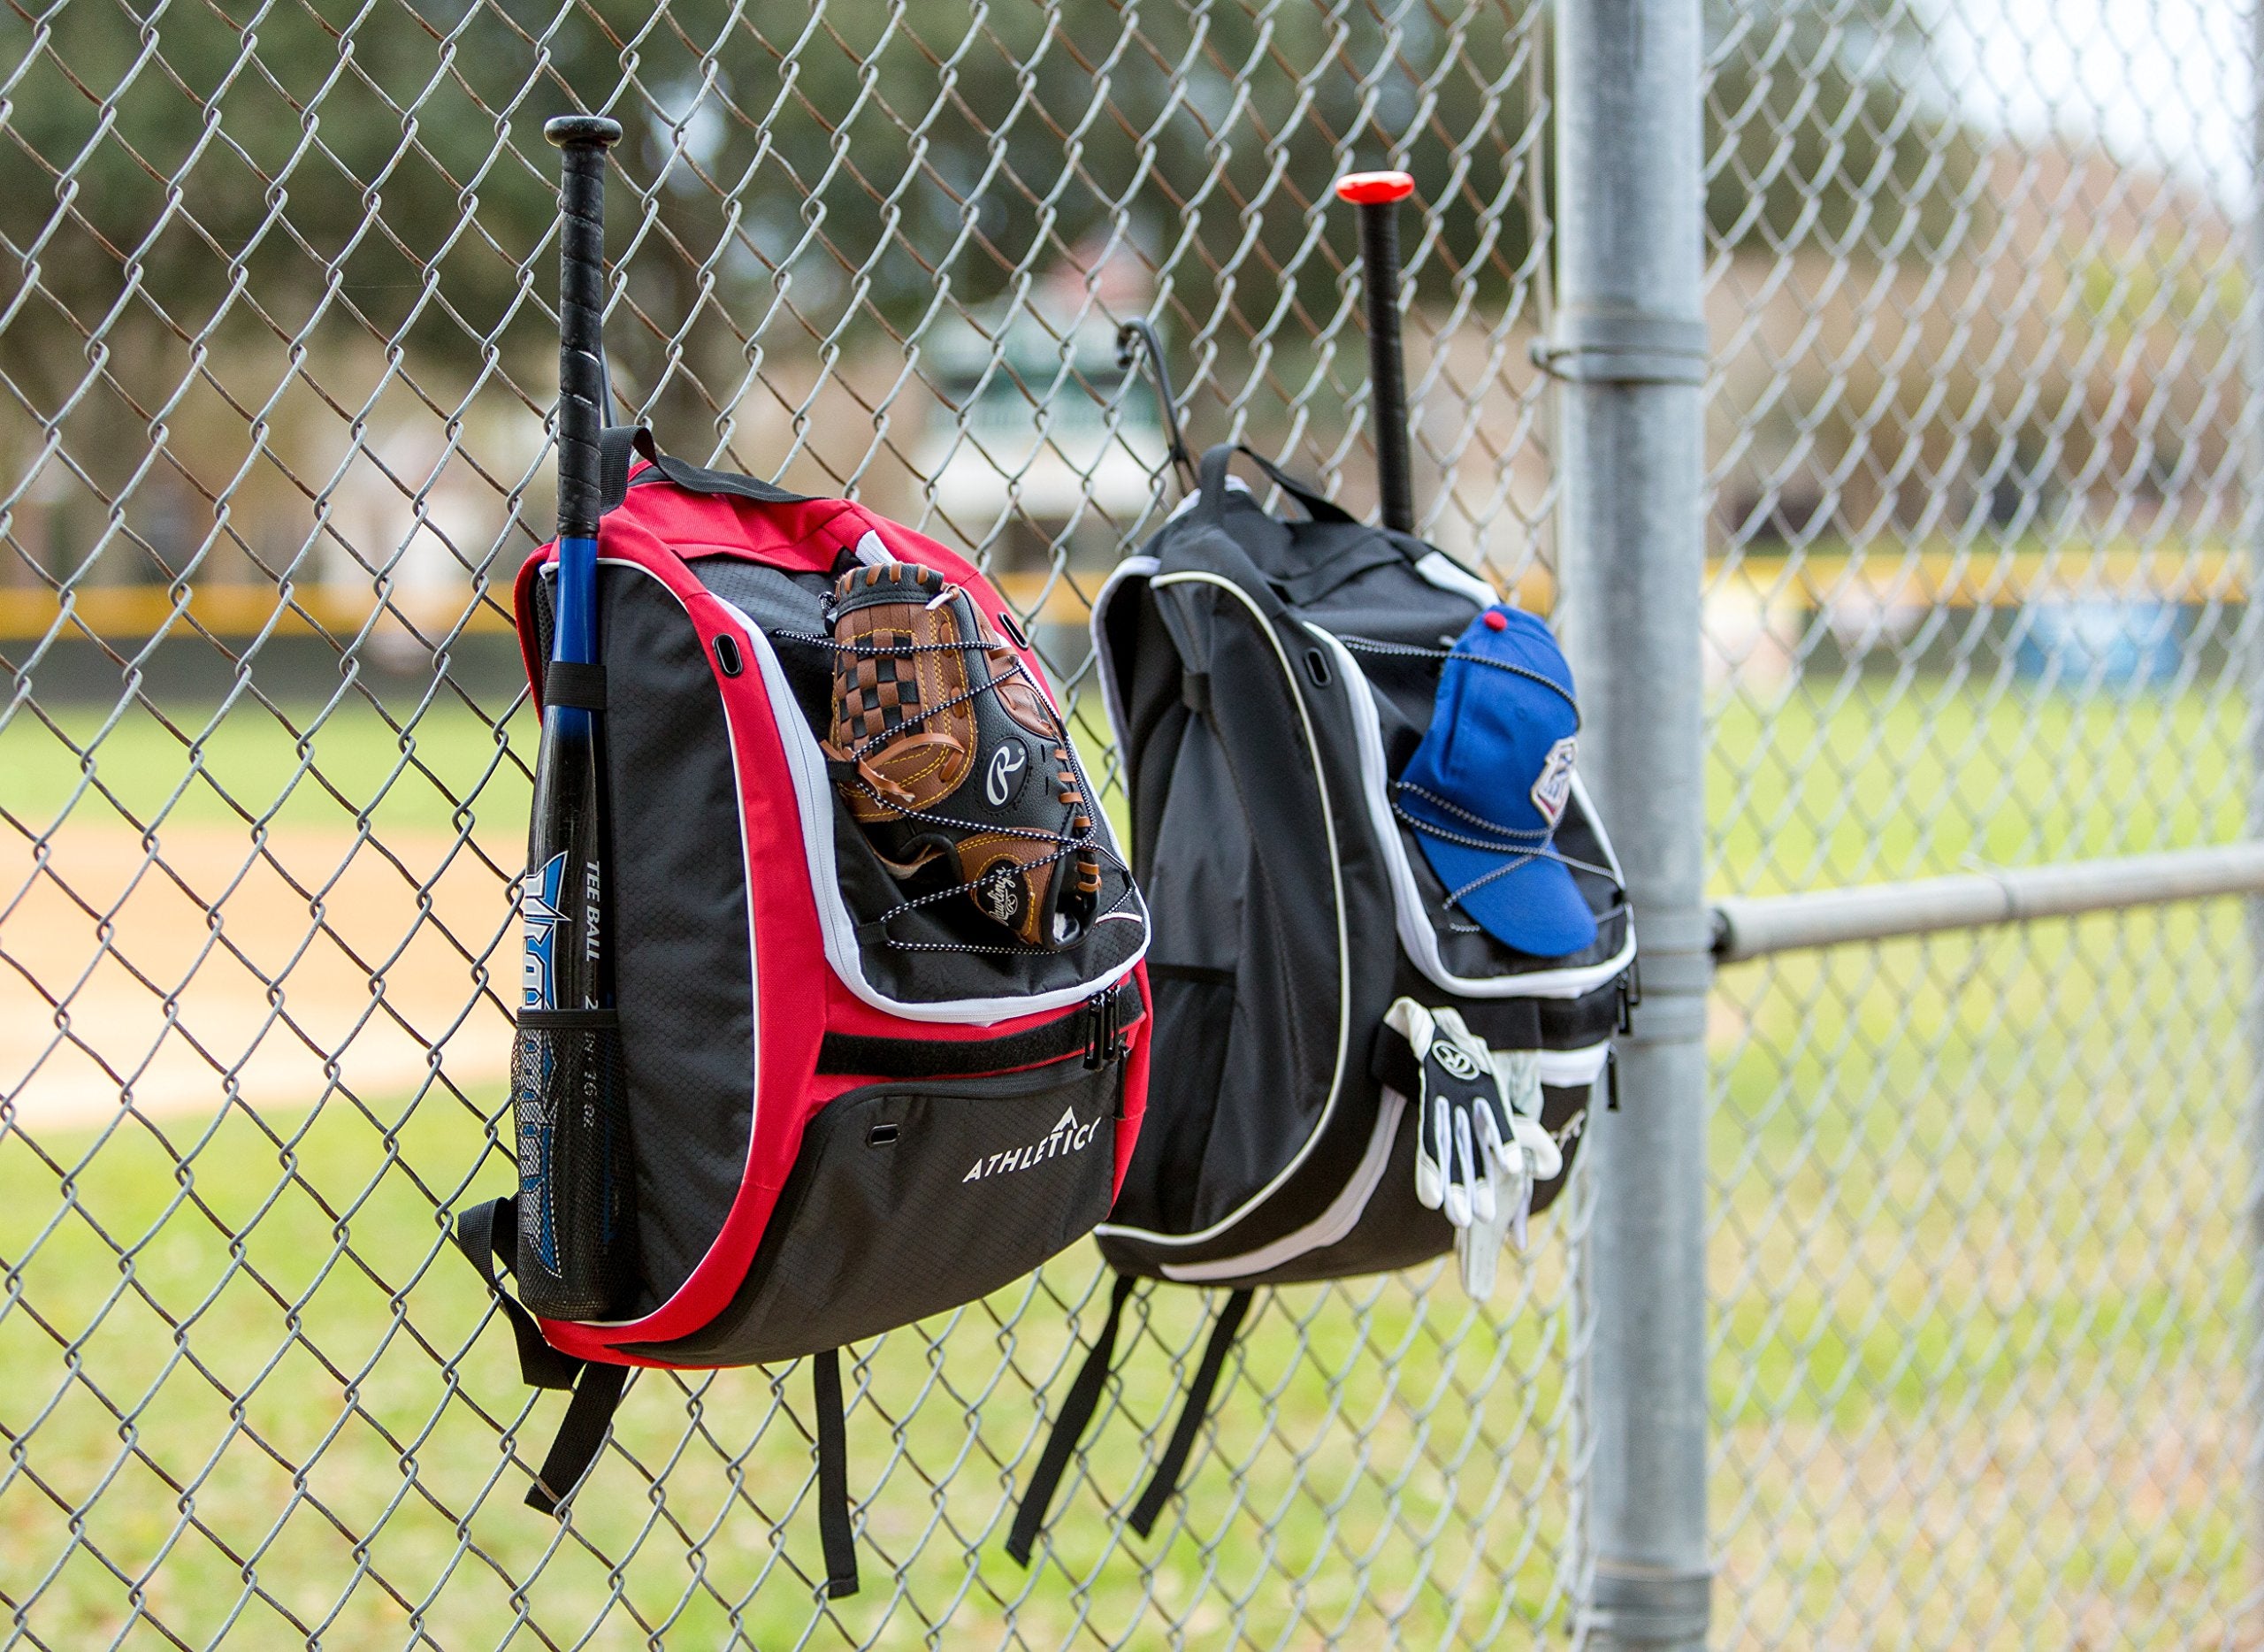 Athletico Baseball Bat Bag - Backpack for Baseball, T-Ball & Softball Equipment & Gear for Youth and Adults | Holds Bat, Helmet, Glove, & Shoes |Shoe Compartment & Fence Hook  - Like New